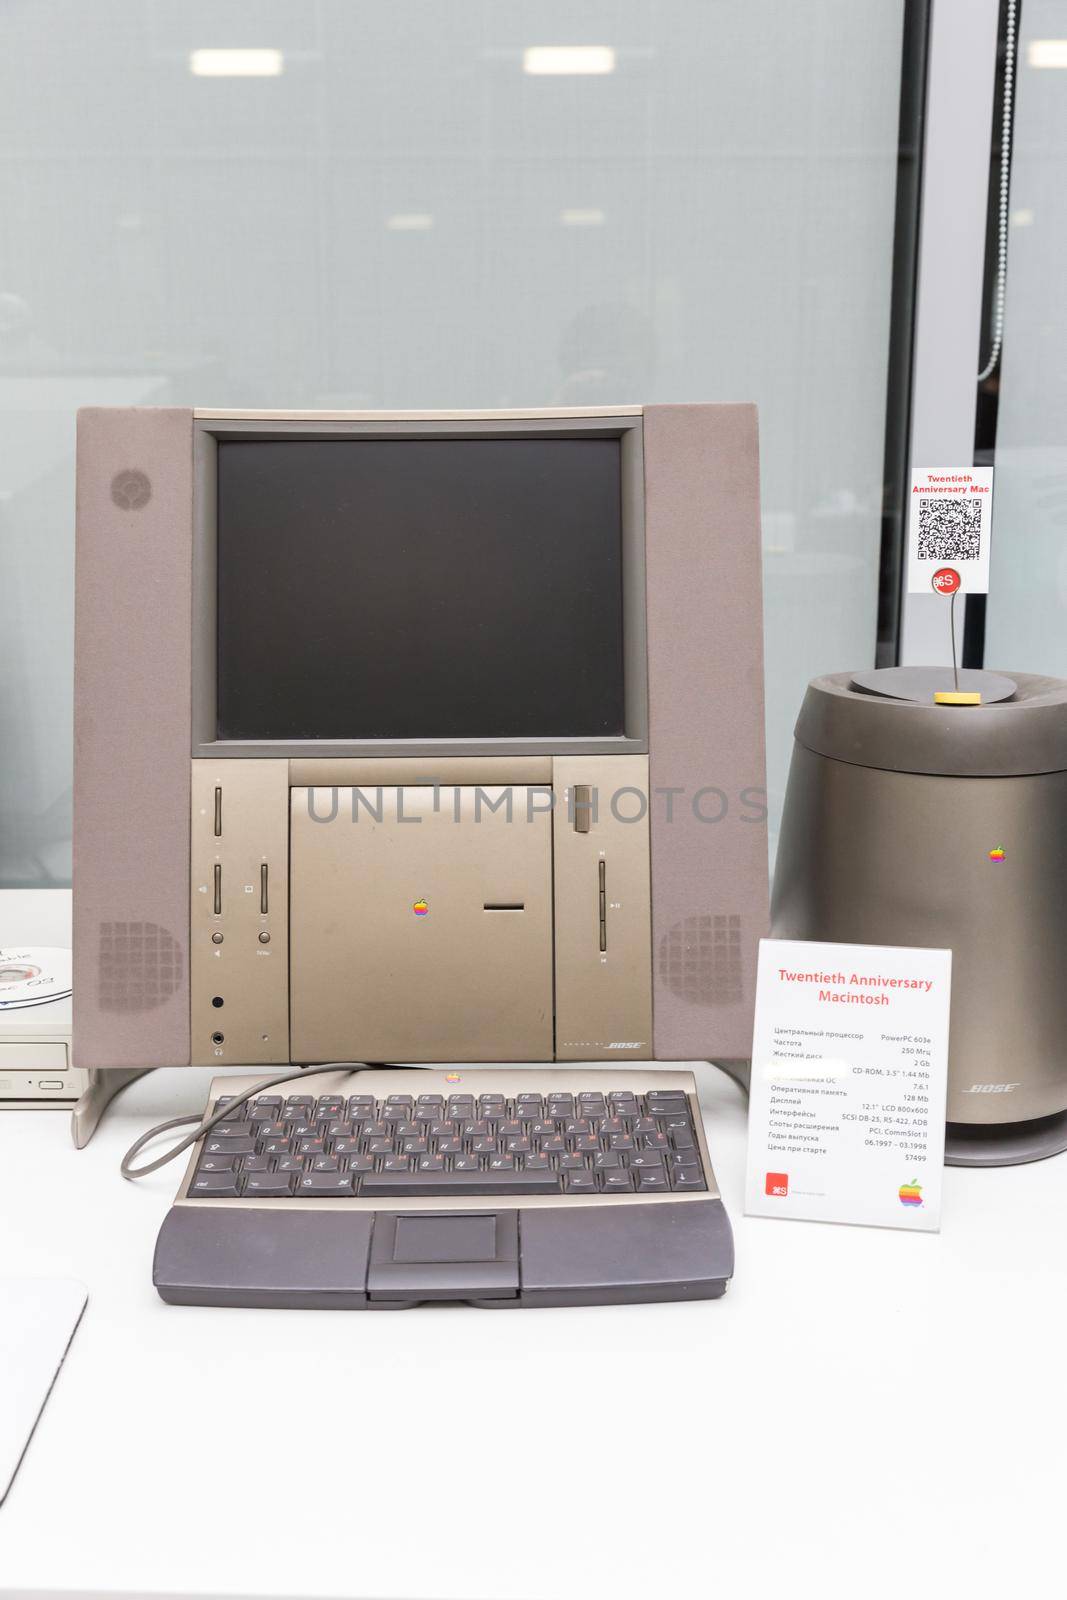 MOSCOW, RUSSIA - JUNE 11, 2018: Old original Apple Mac computer in museum in Moscow Russia by Mariakray